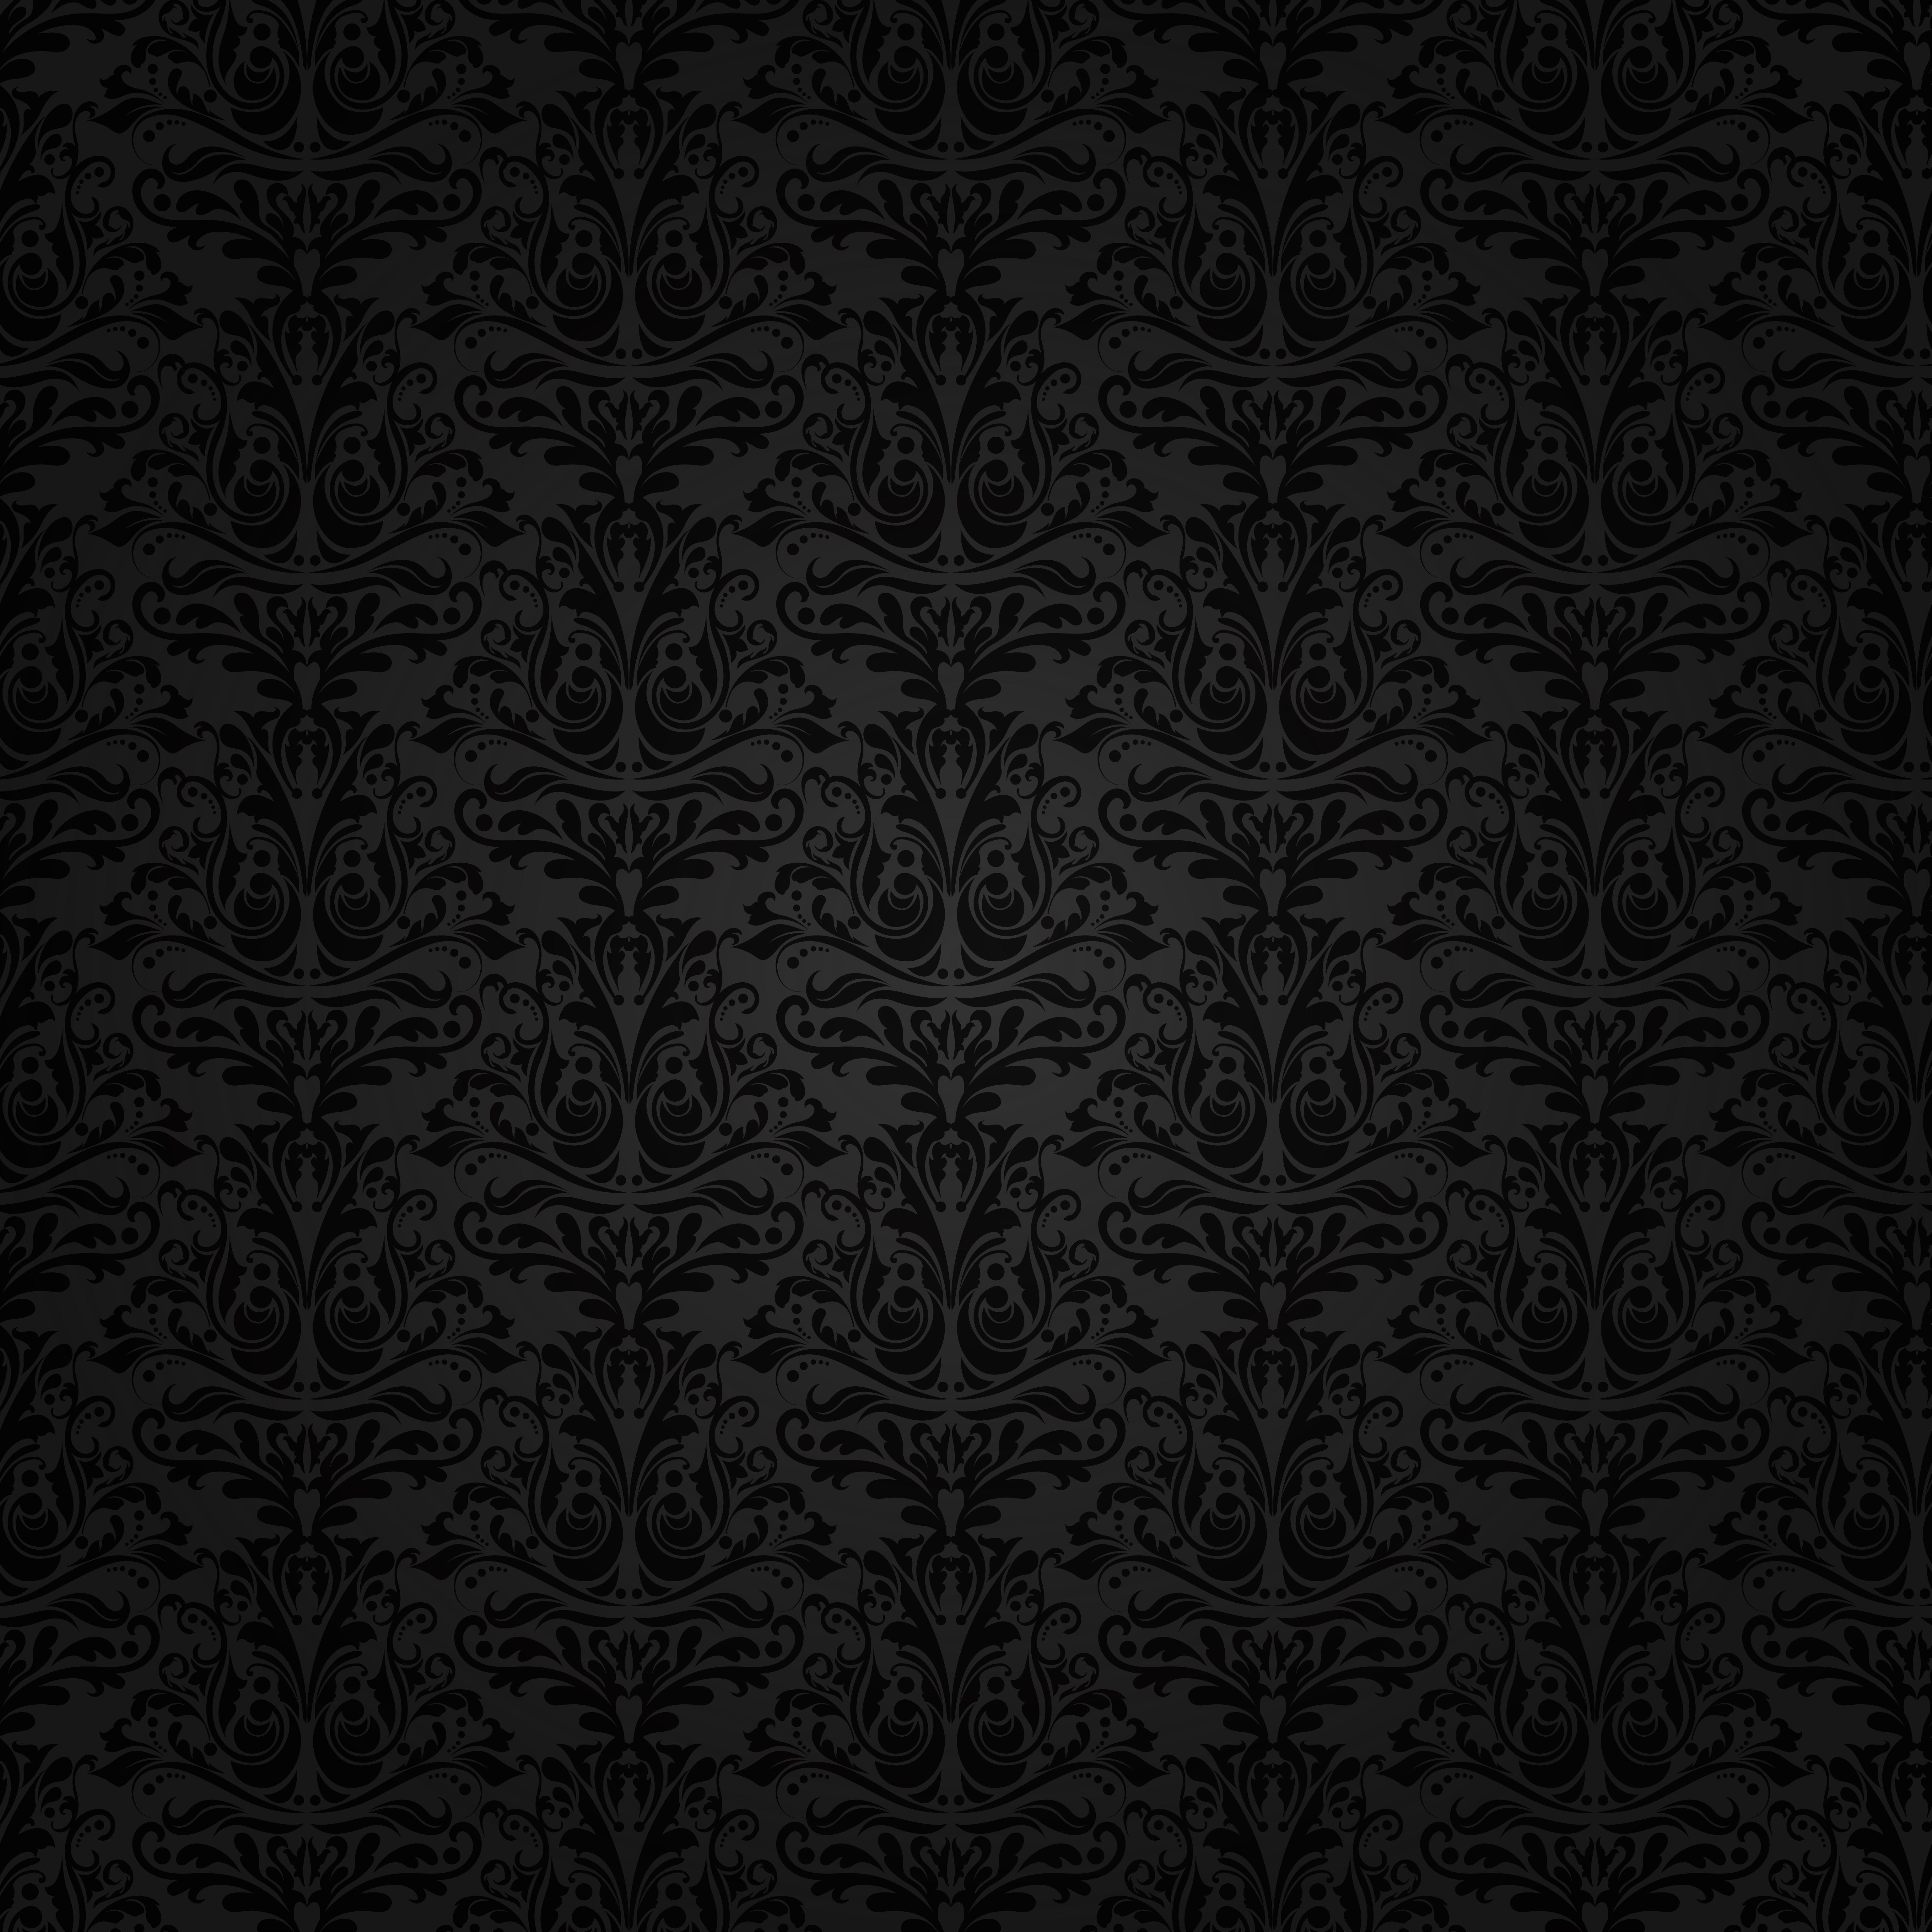 Black Background with Ornaments